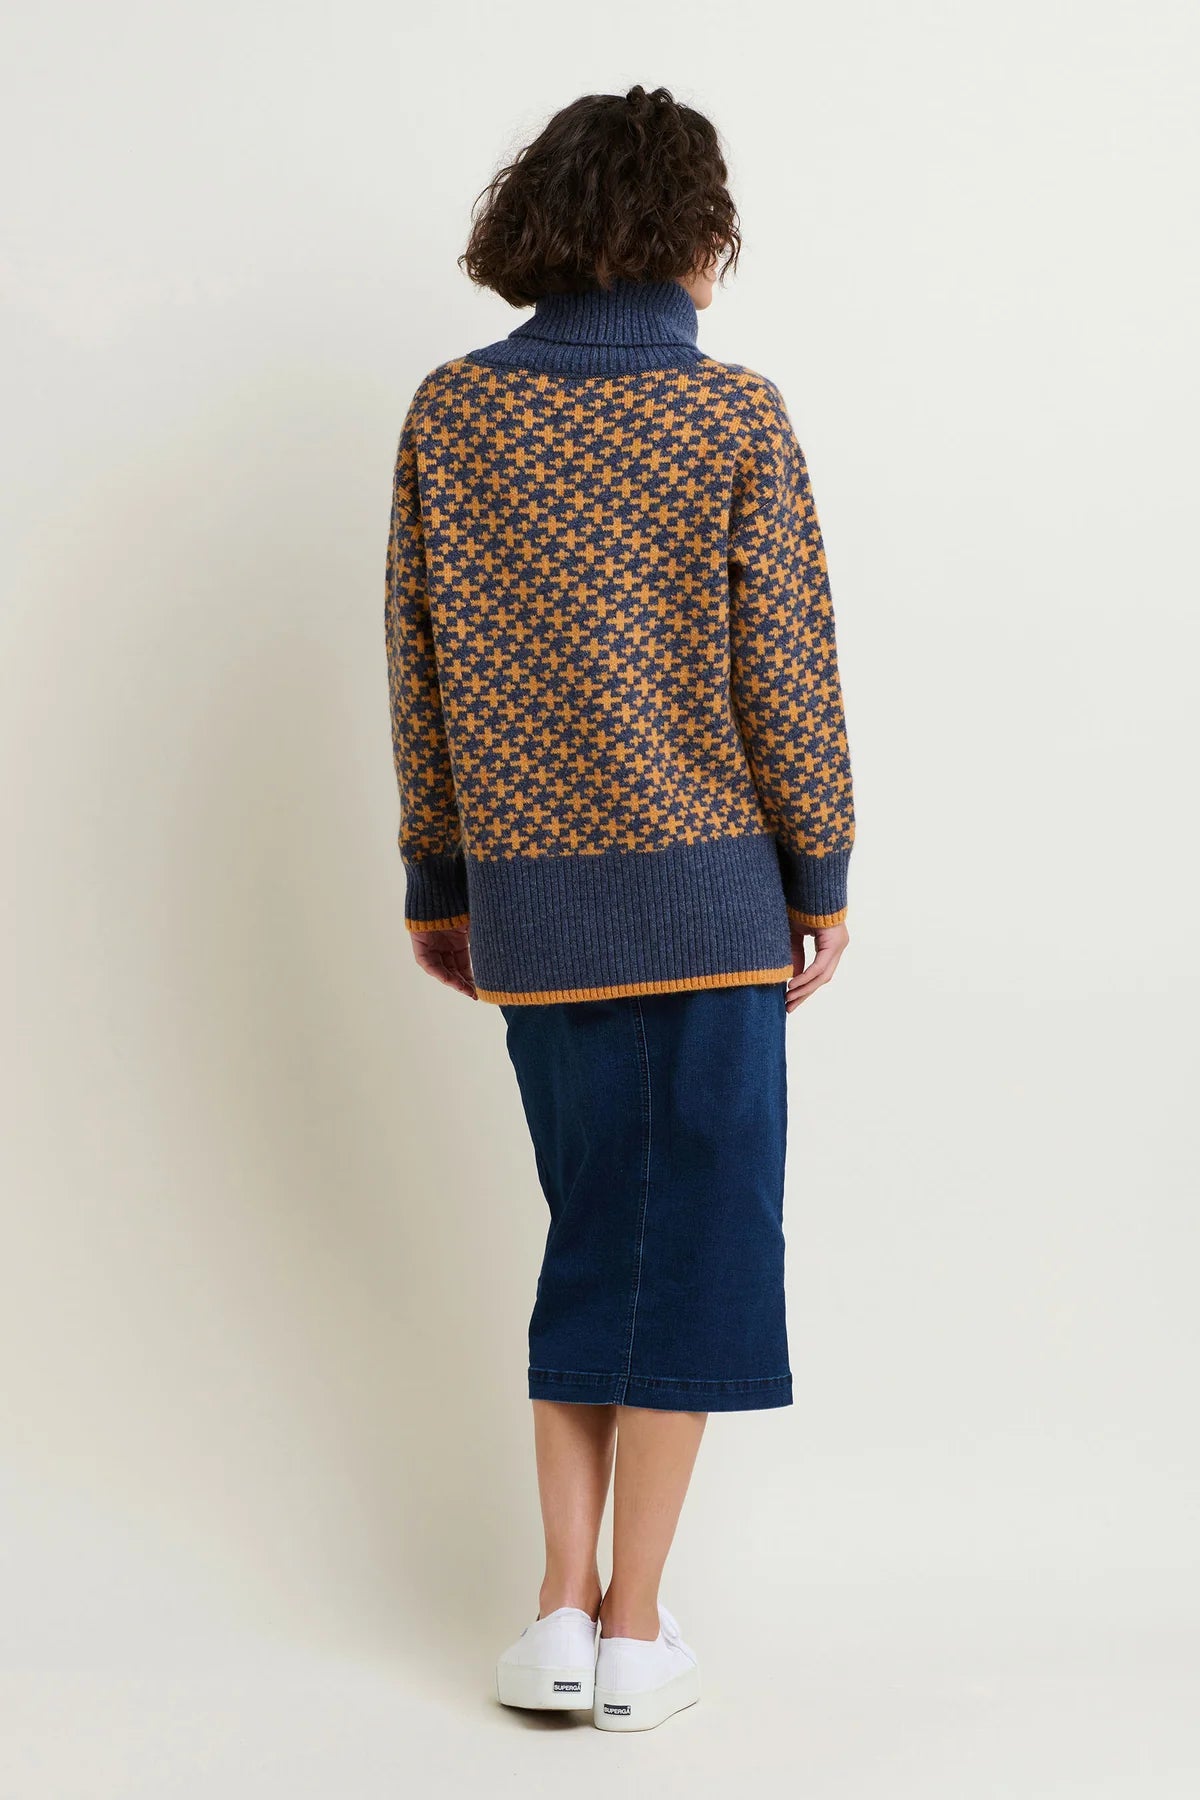 Back view of a woman wearing a knitted jumper with blue loose roll neck, blue main fabric with small and slightly larger crosses knitted through. Worn with a dark blue denim skirt.